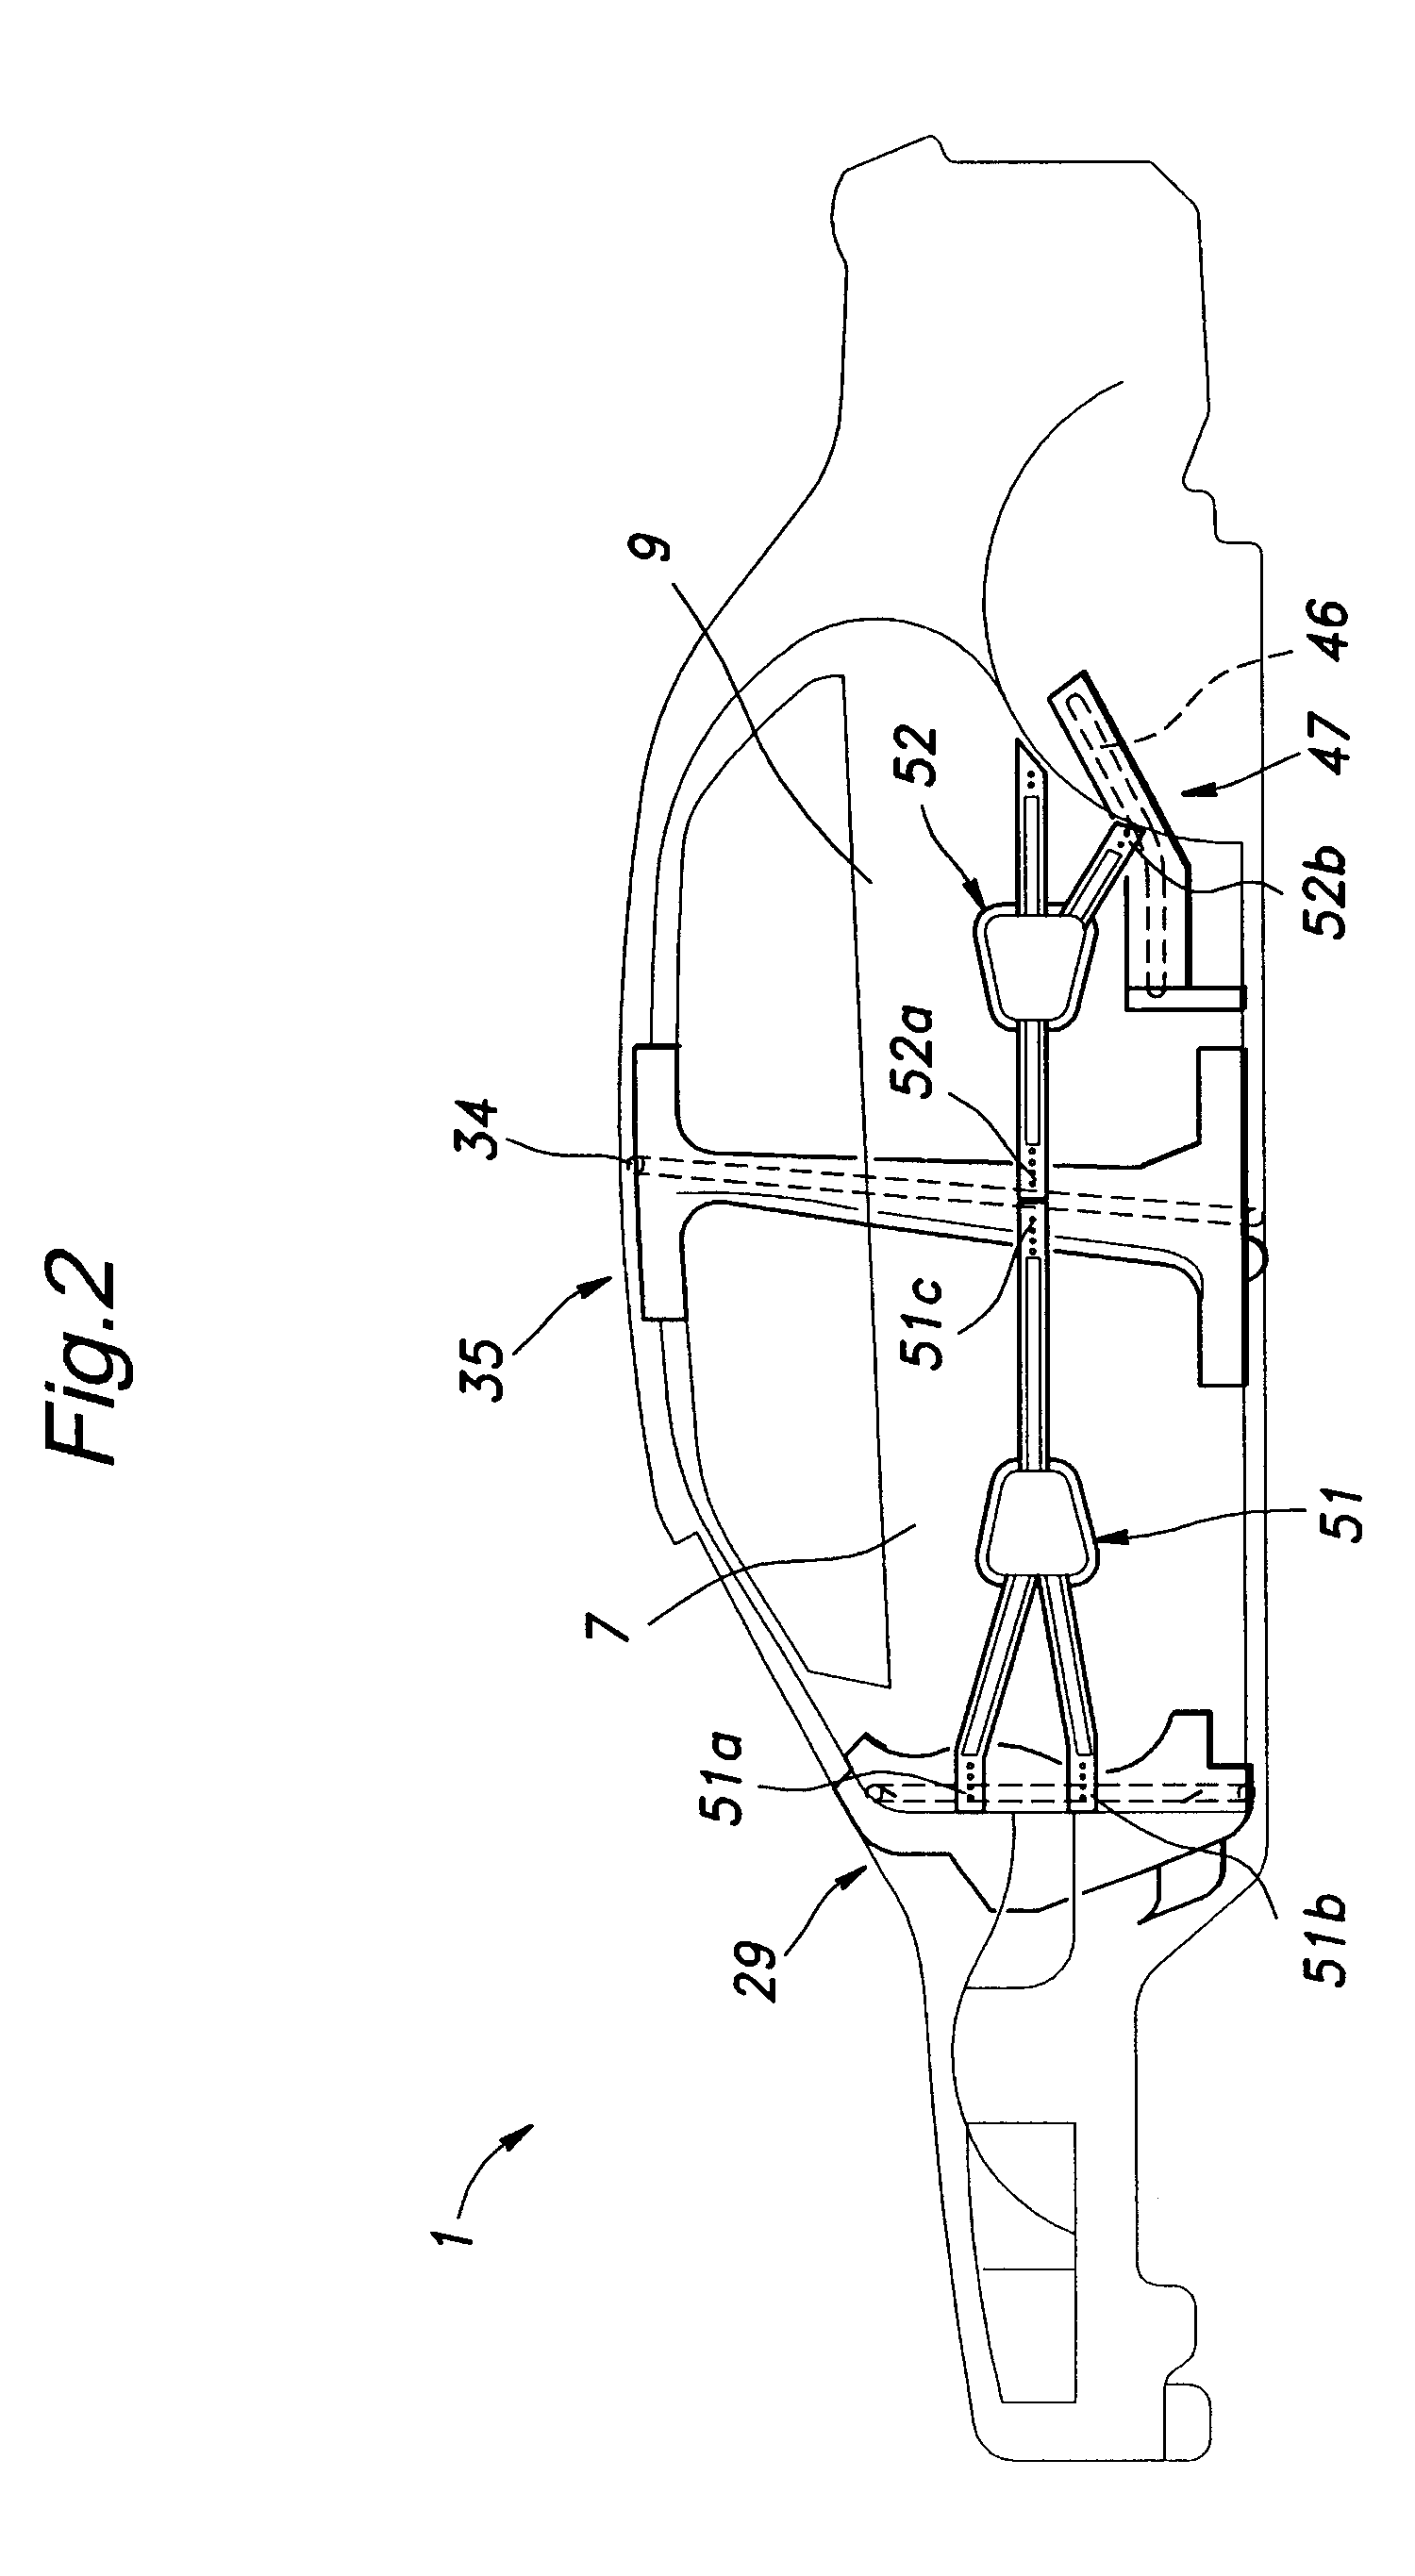 Vehicle body structure reinforced against side impact